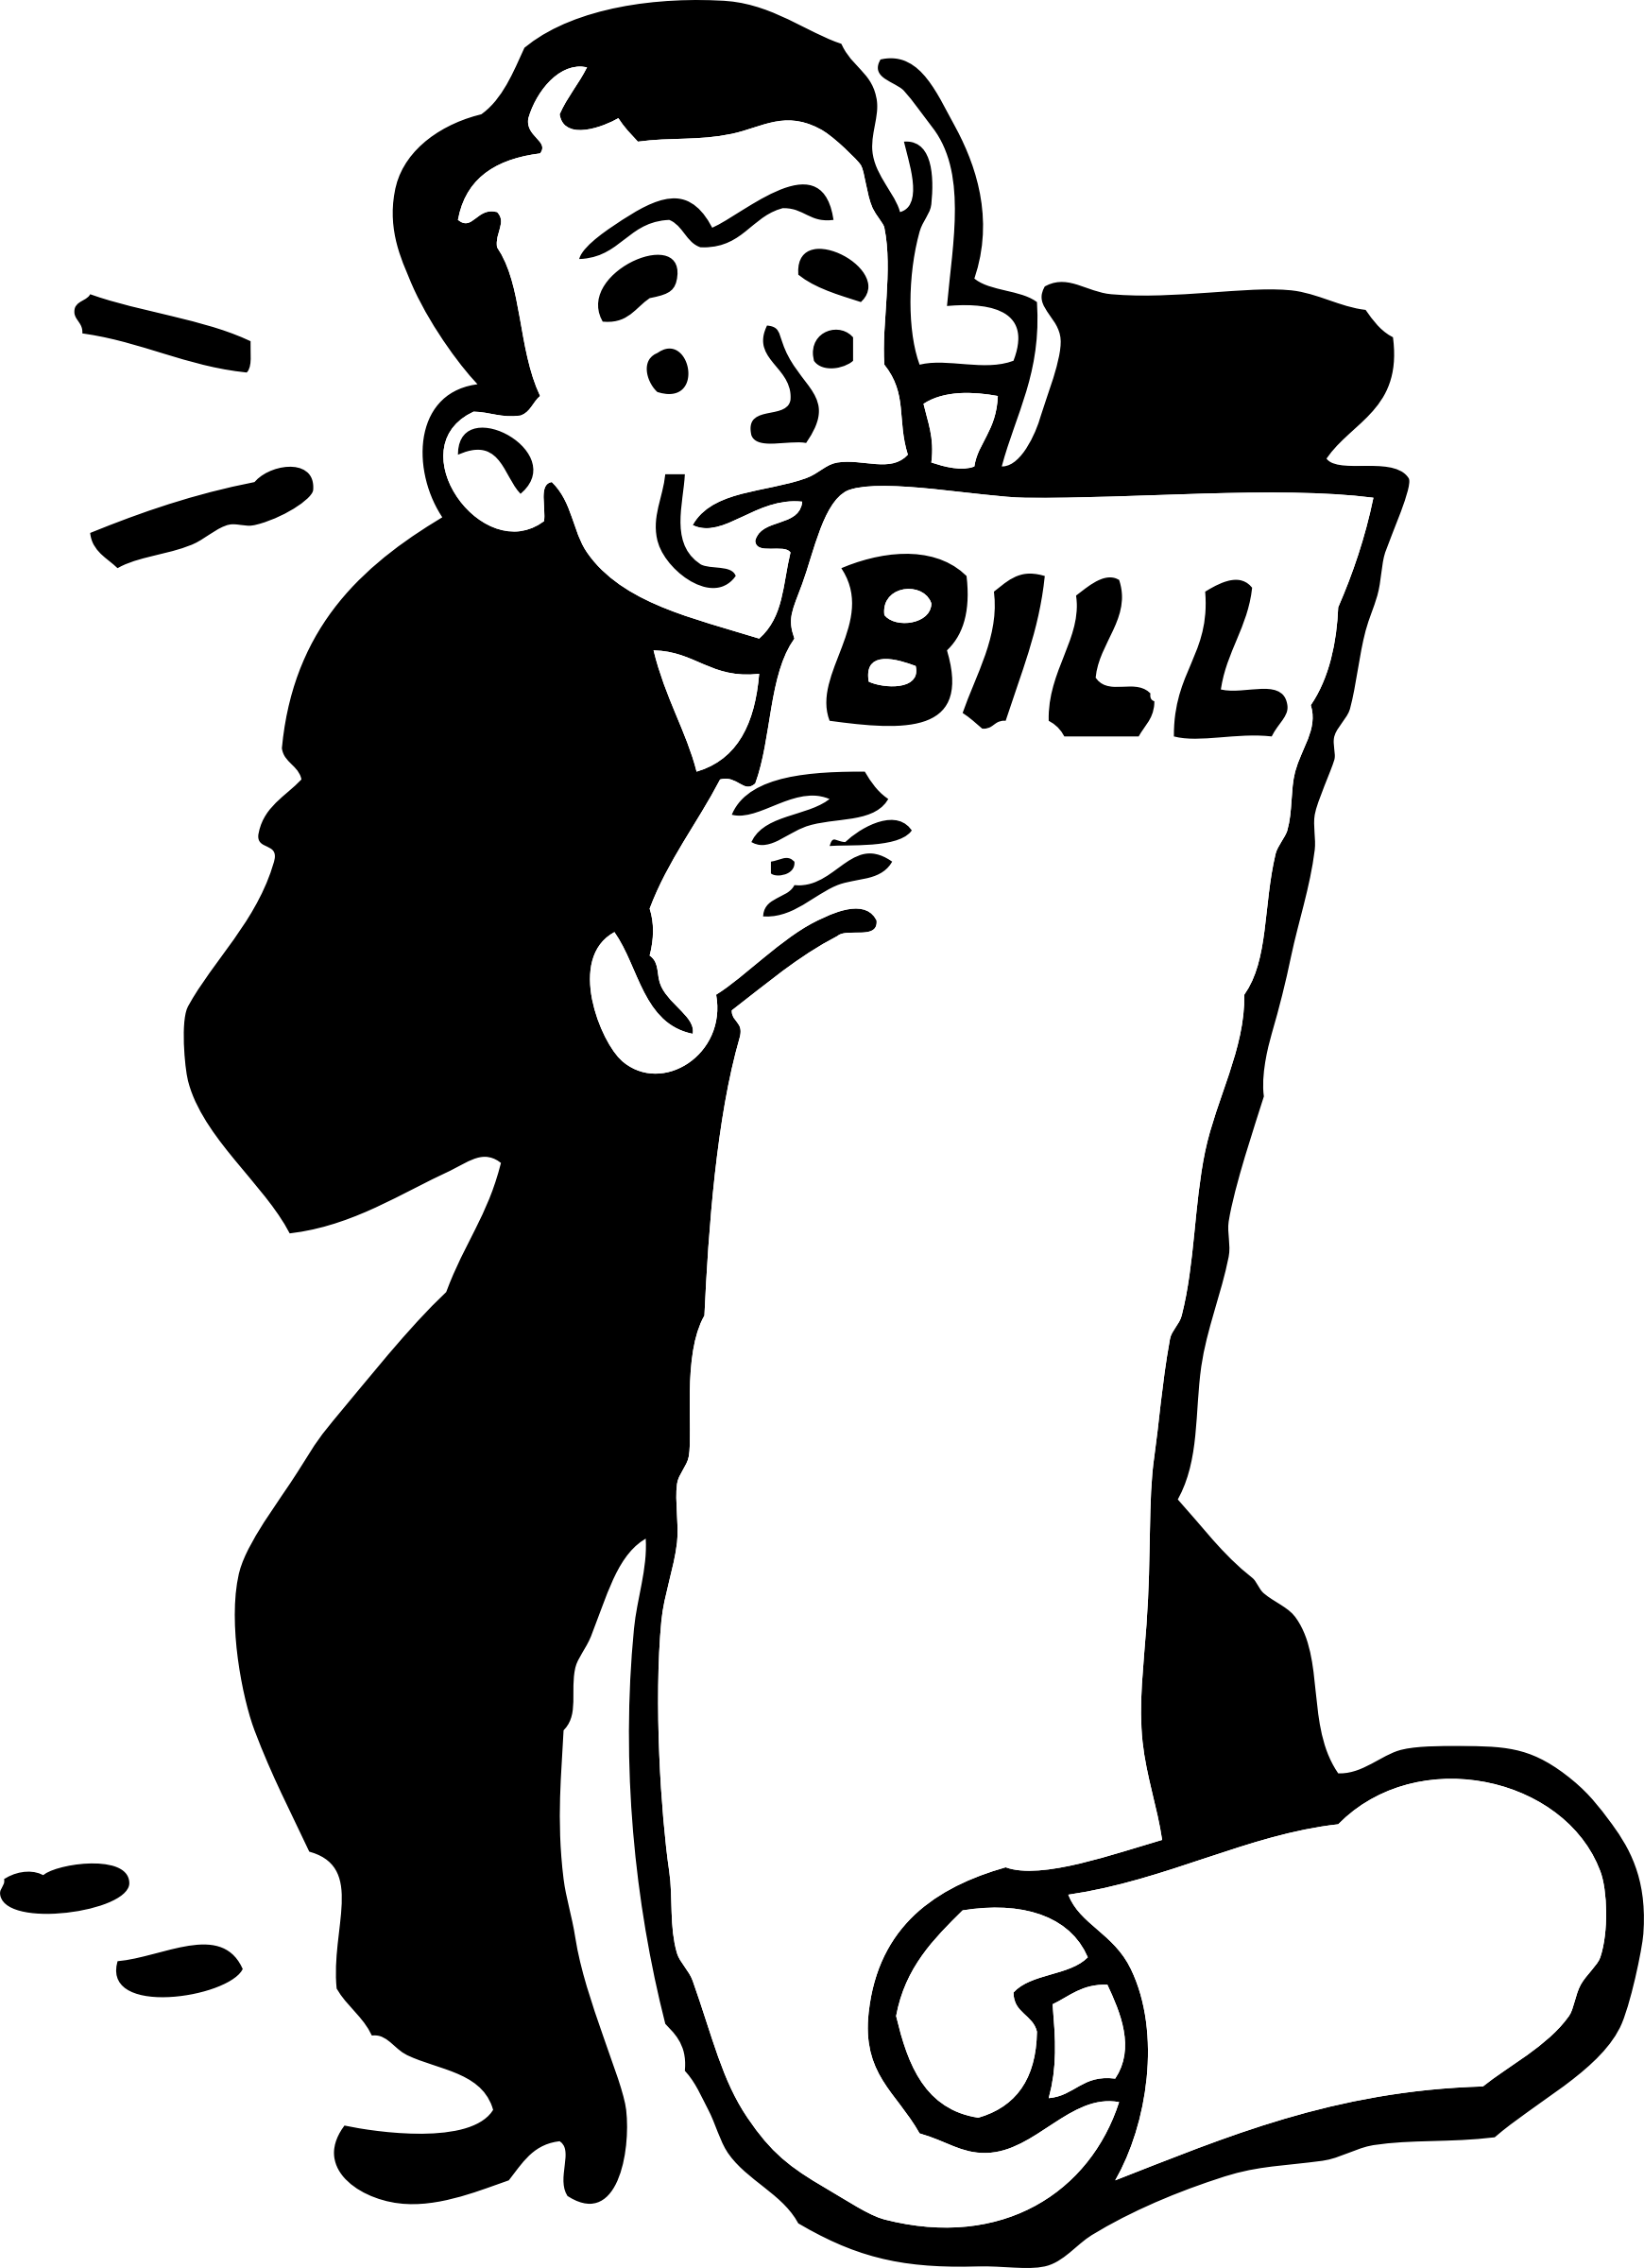 Worried about a bill. Mystery clipart word